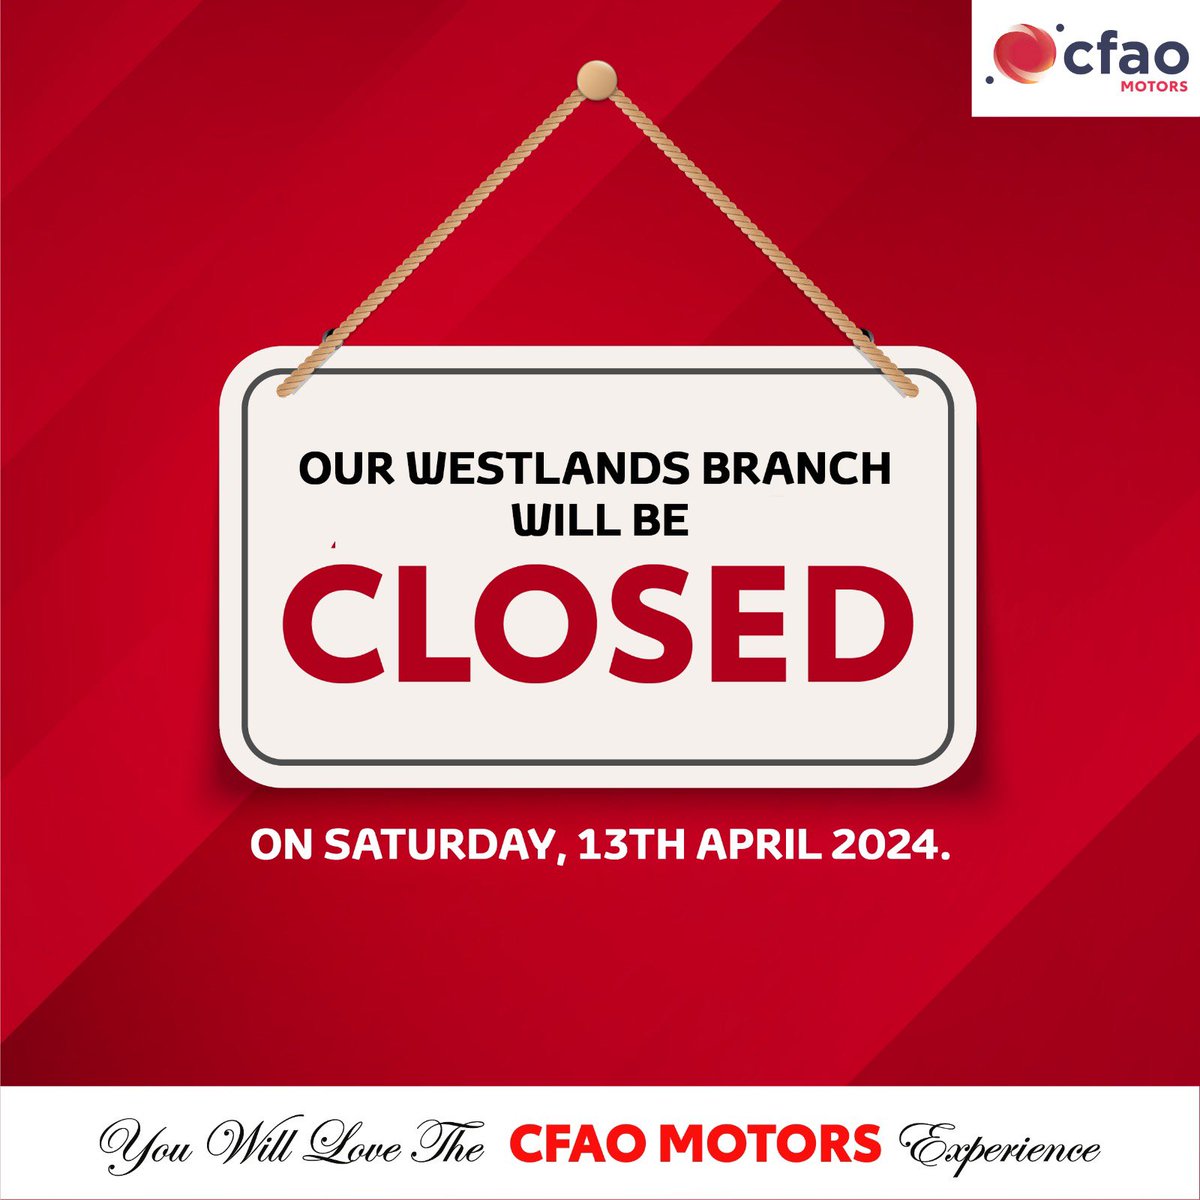 Dear valued customer, Please note that the CFAO Motors Westlands Branch will be closed on Saturday, April 13th, 2024. We apologize for any inconvenience caused. Normal operations will resume on Monday, April 15th, 2024. #CFAOMotorsDrivesKenya